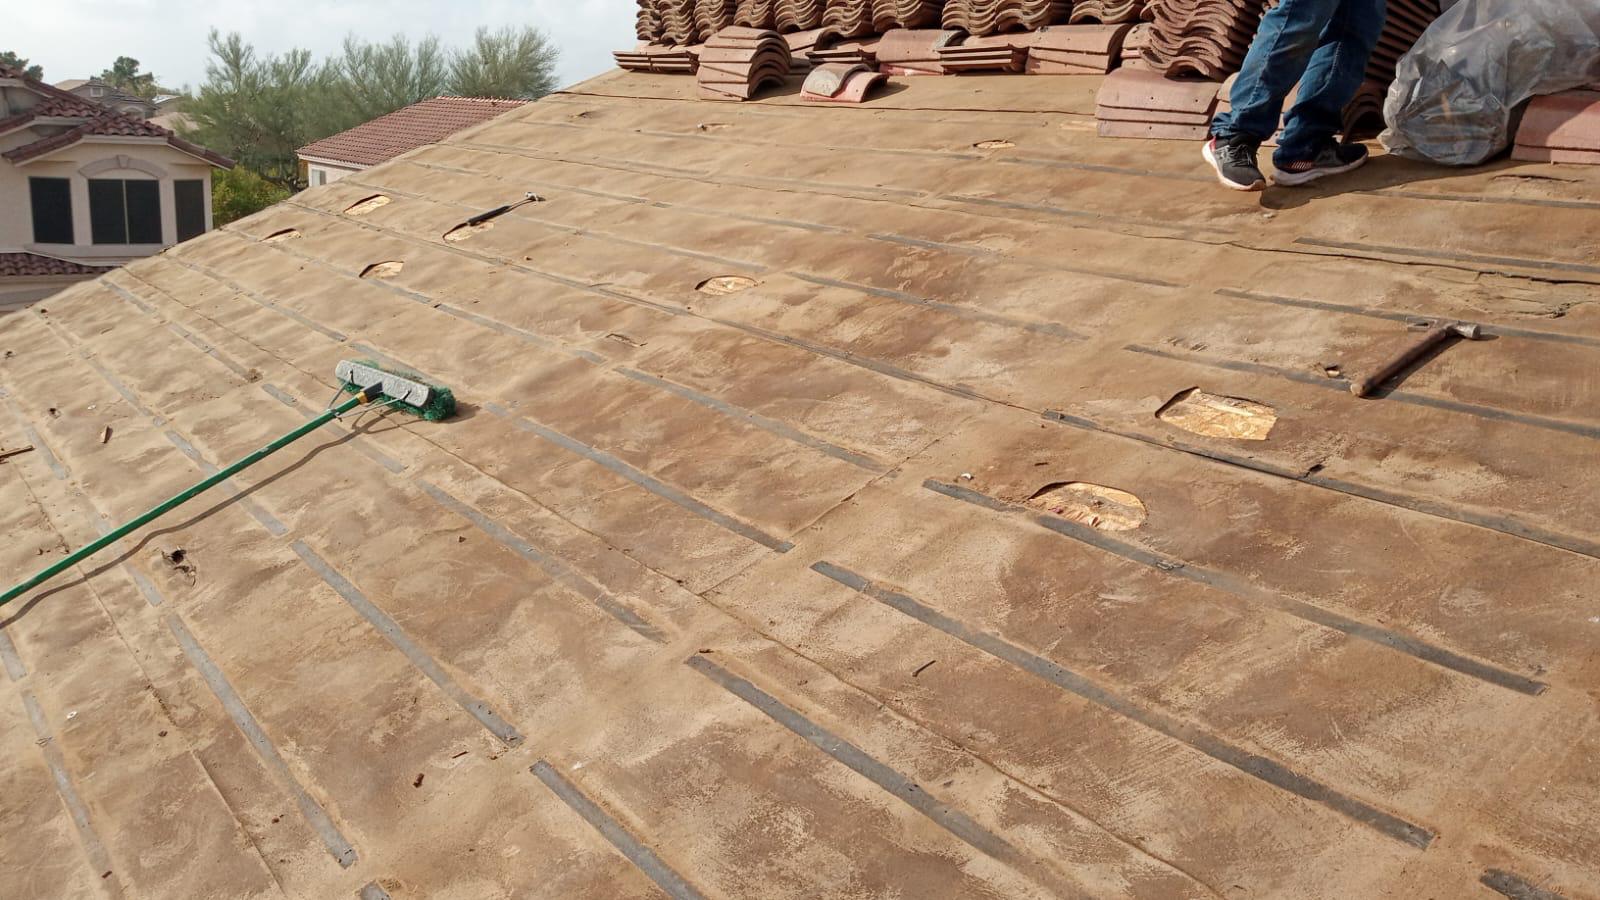 Behmer Roofing's expertise in action during a Cave Creek tile re-felt, with a clear focus on quality and craftsmanship.